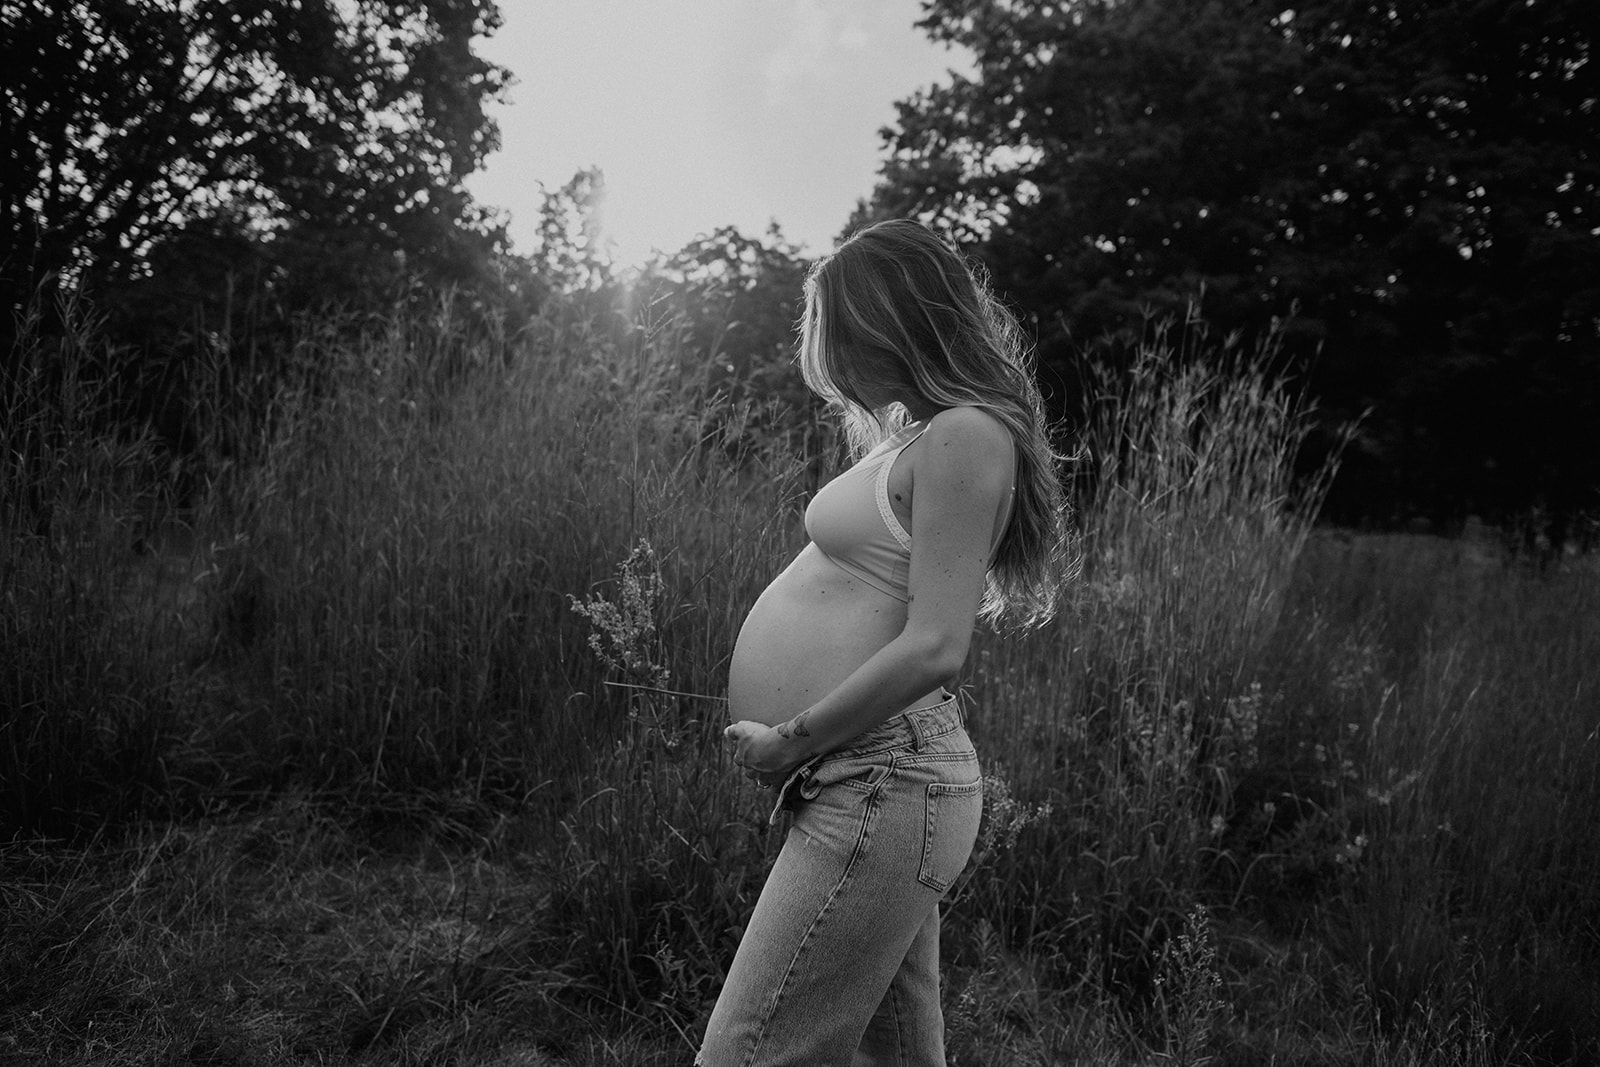 Mom-to-be holds her pregnant belly in a black and white maternity photo